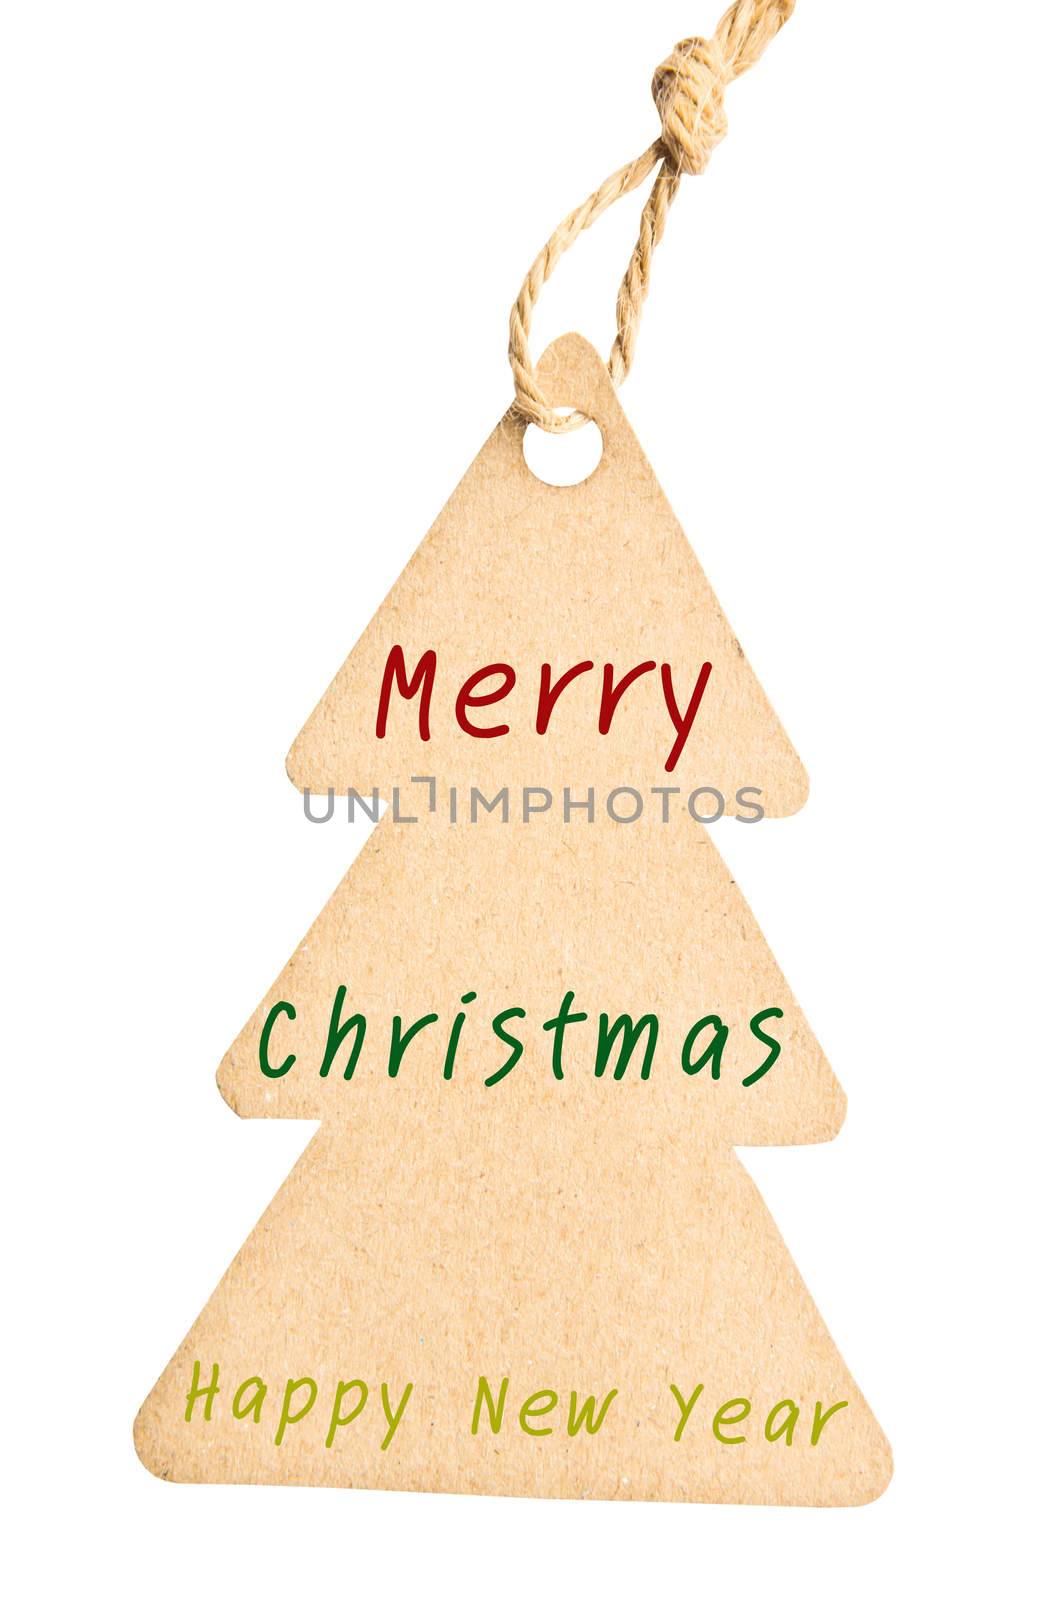 Merry christmas and Happy new year on Blank tag christmas tree shape tied with brown string isolated against a white background, clipping path